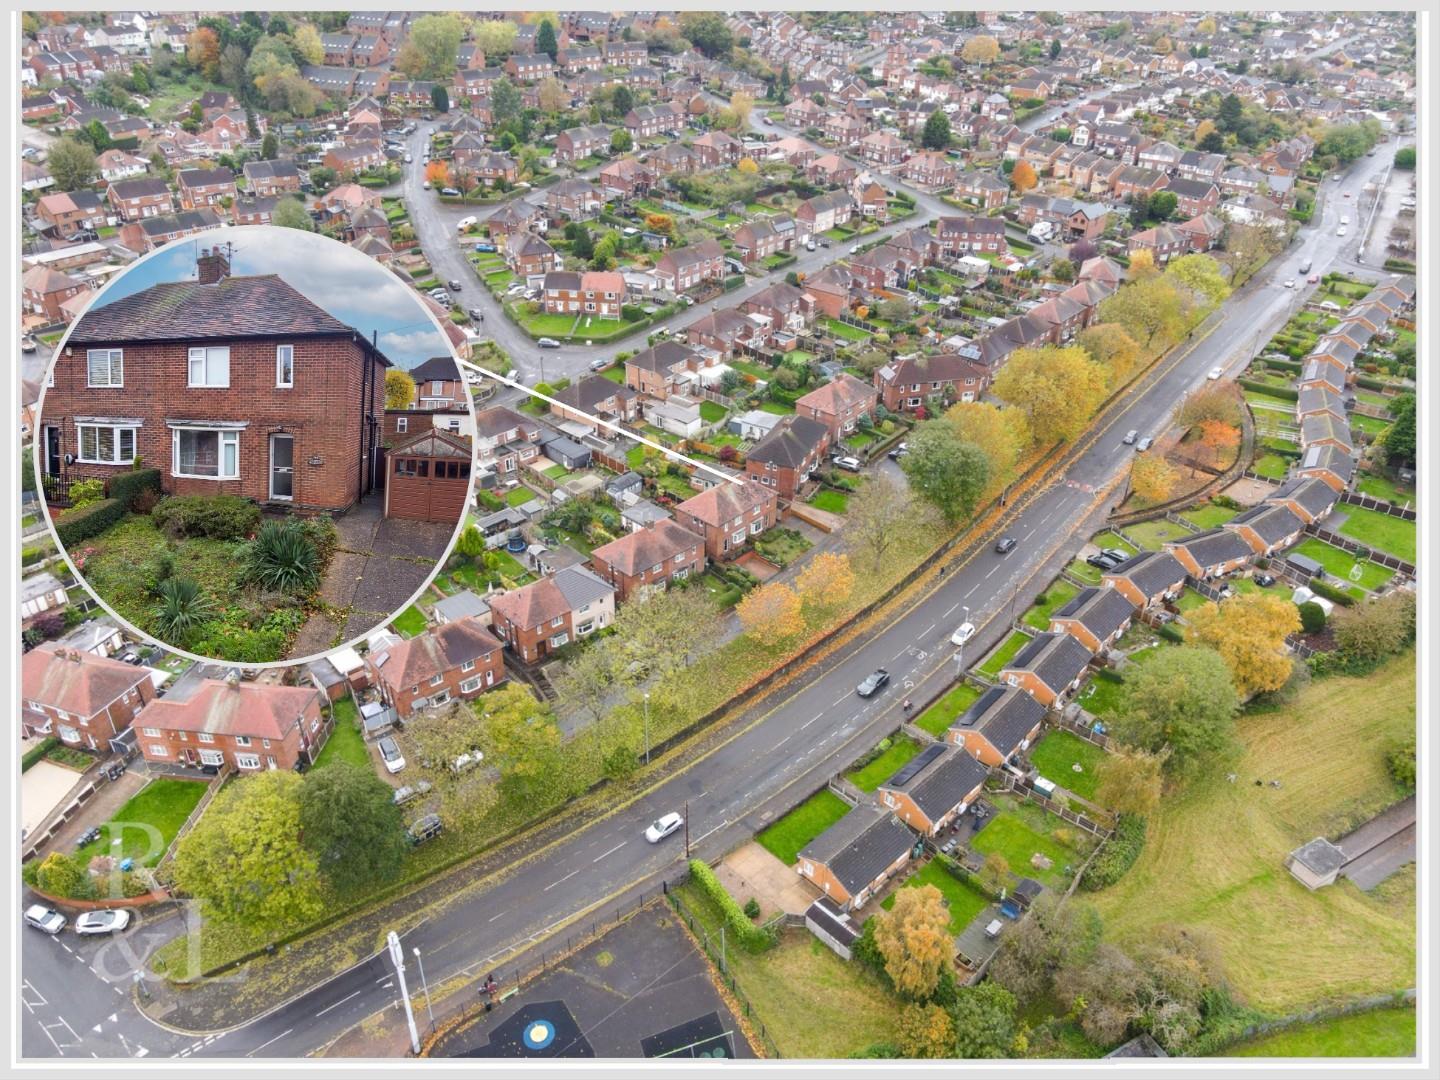 Property image for Foxhill Road, Carlton, Nottingham